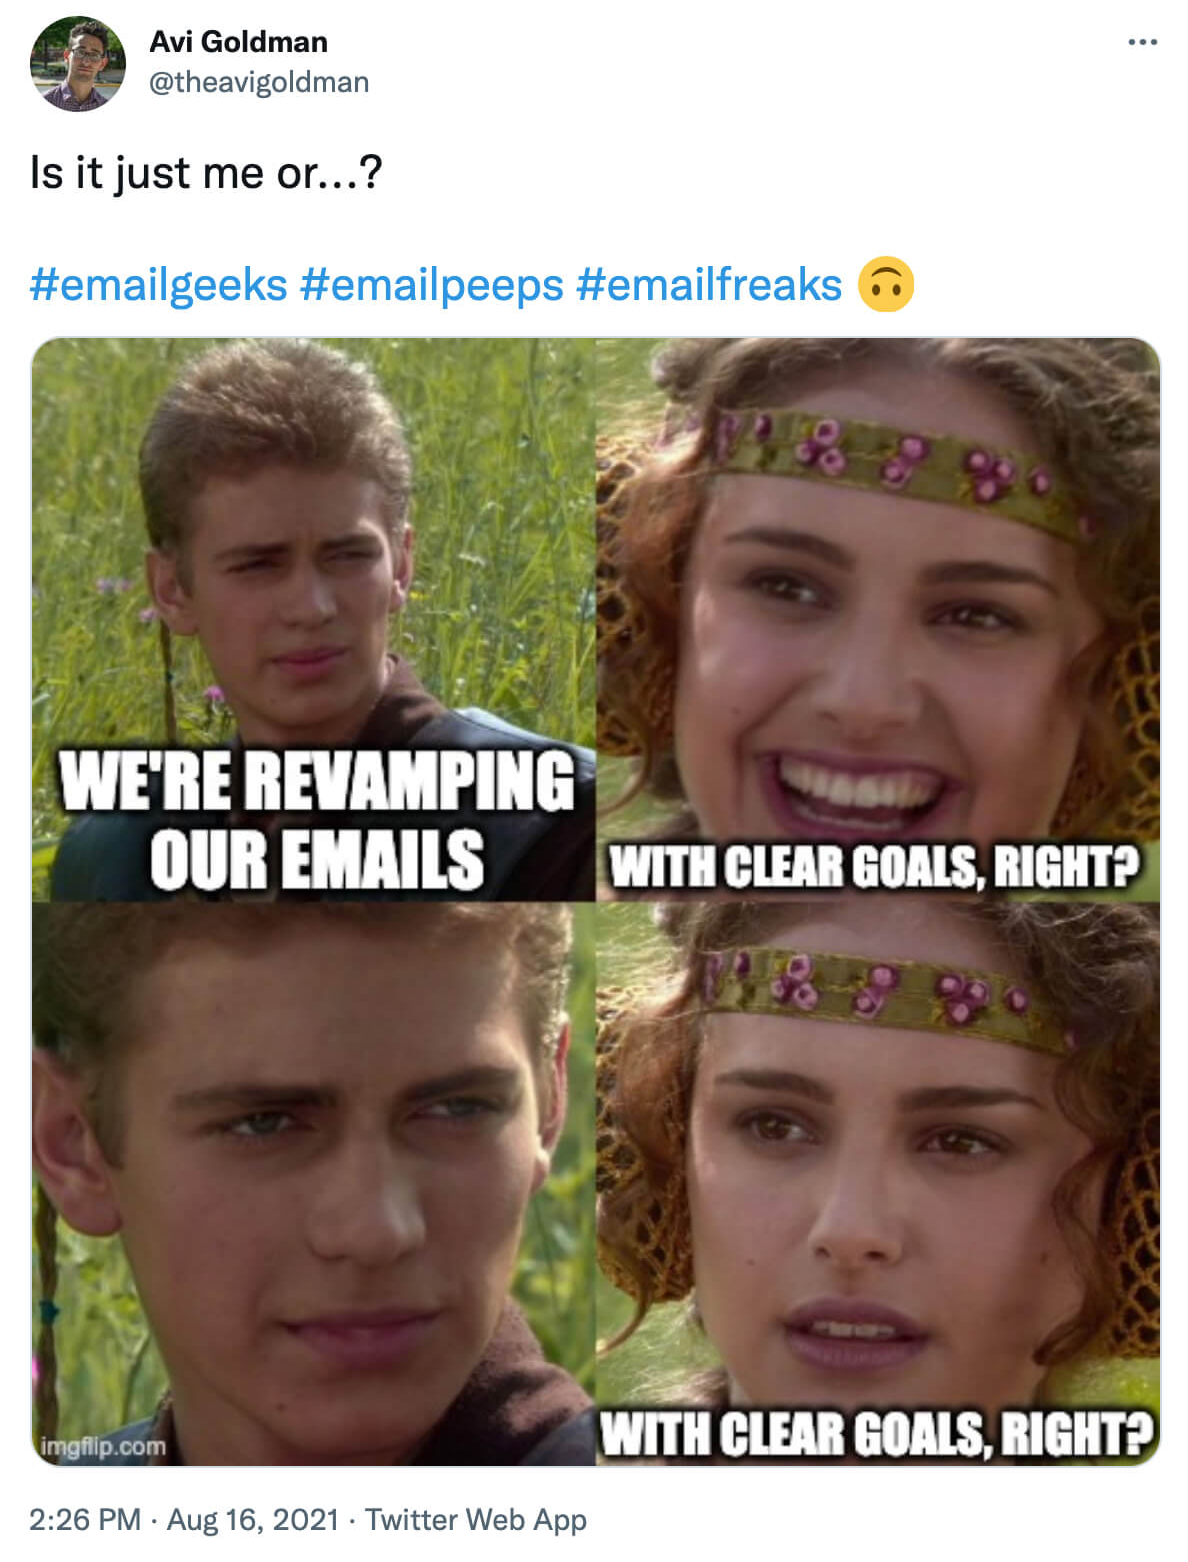 @theavigoldman on twitter: Is it just me or...? Star Wars meme with Anakin and Padmé
Anakin: We're revamping our emails
Padmé: With clear goals, right?
Anakin: *gives evil stare*
Padmé: *gives concerned look* With clear goals, right?